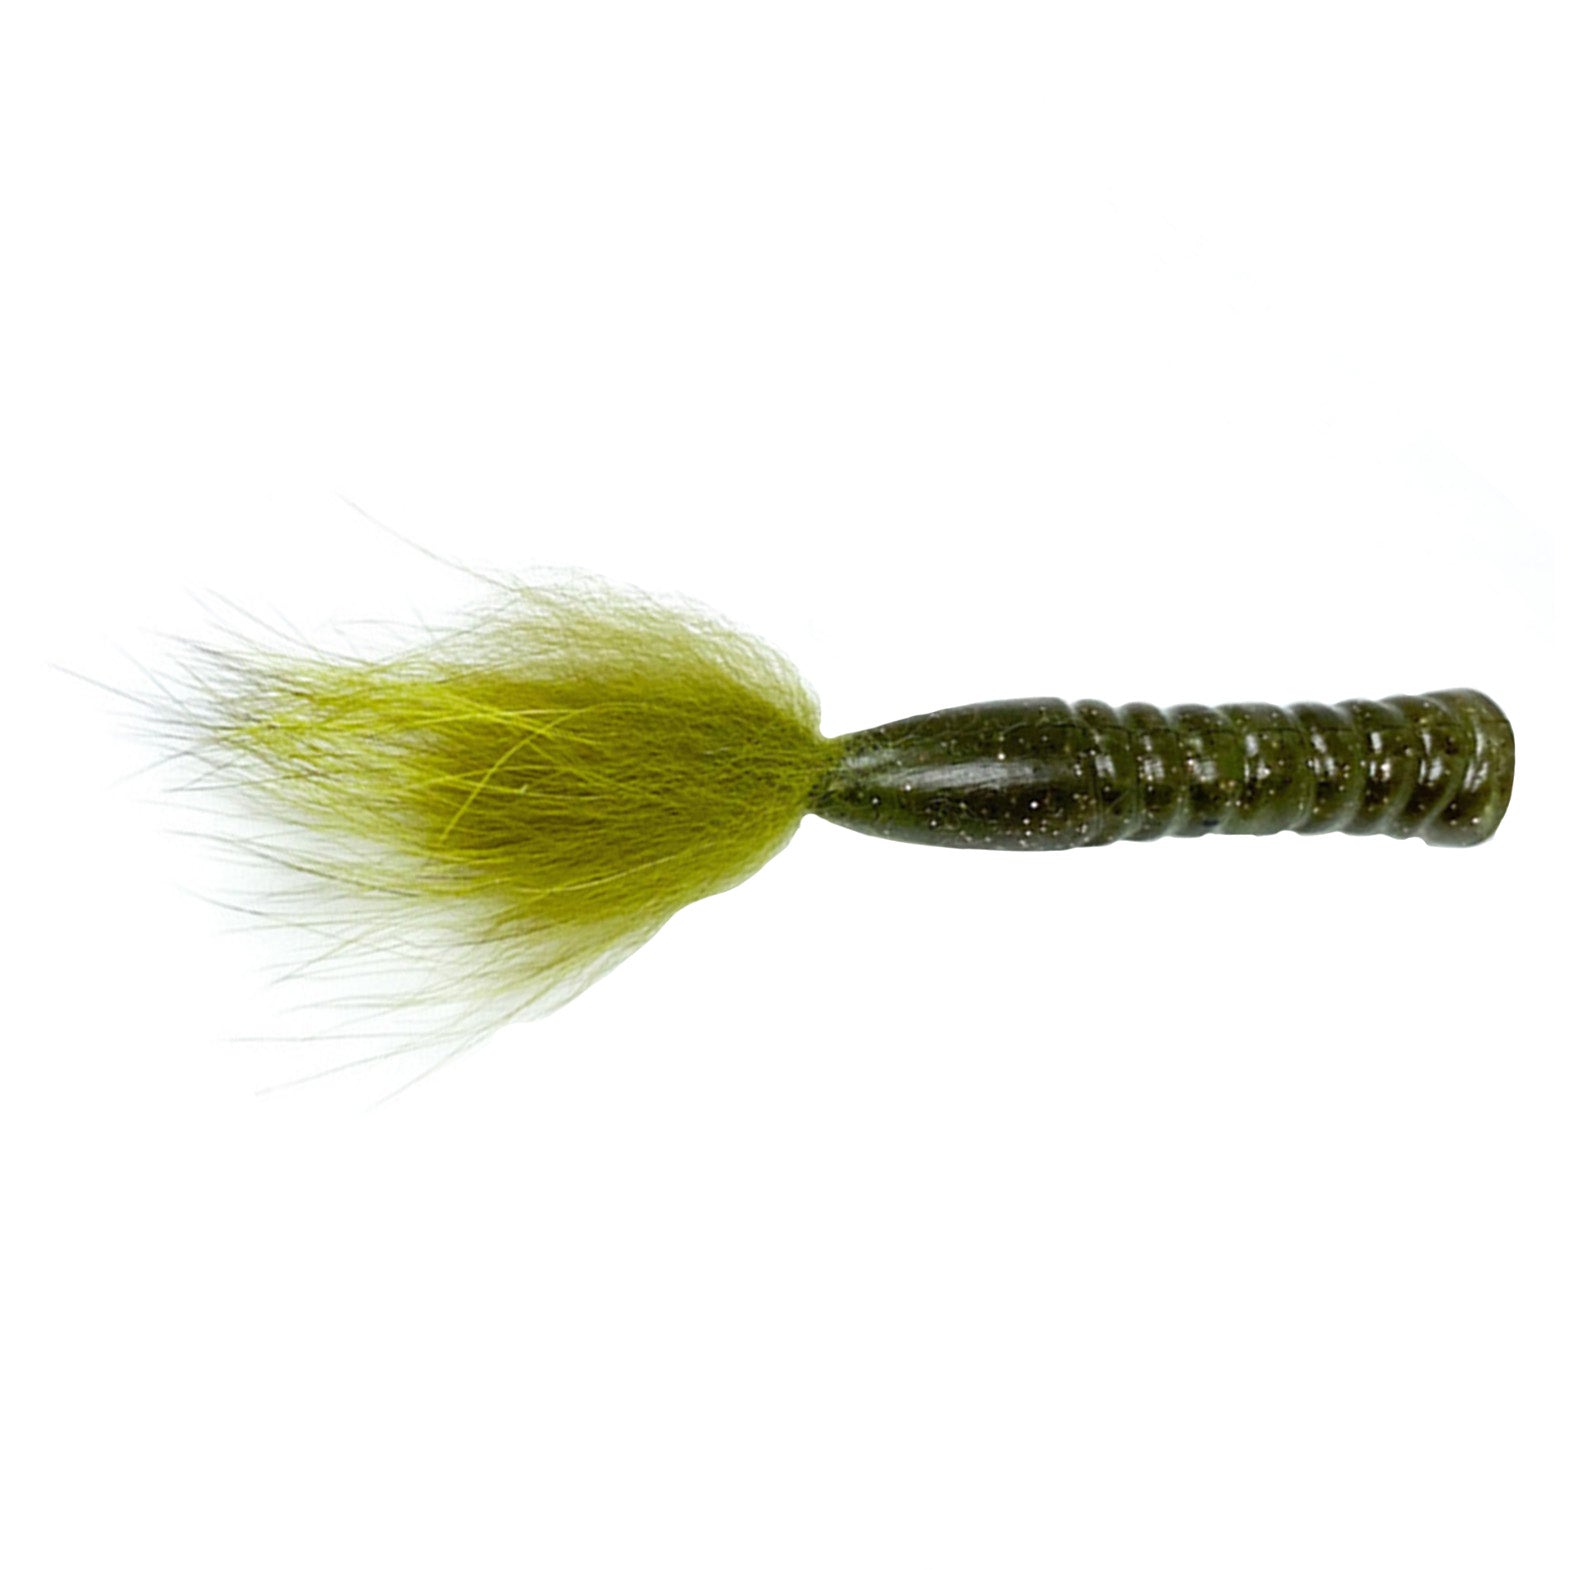 Rabid Baits Fox Tail Ned Rig Bait - 3in - Monster Ruby Red